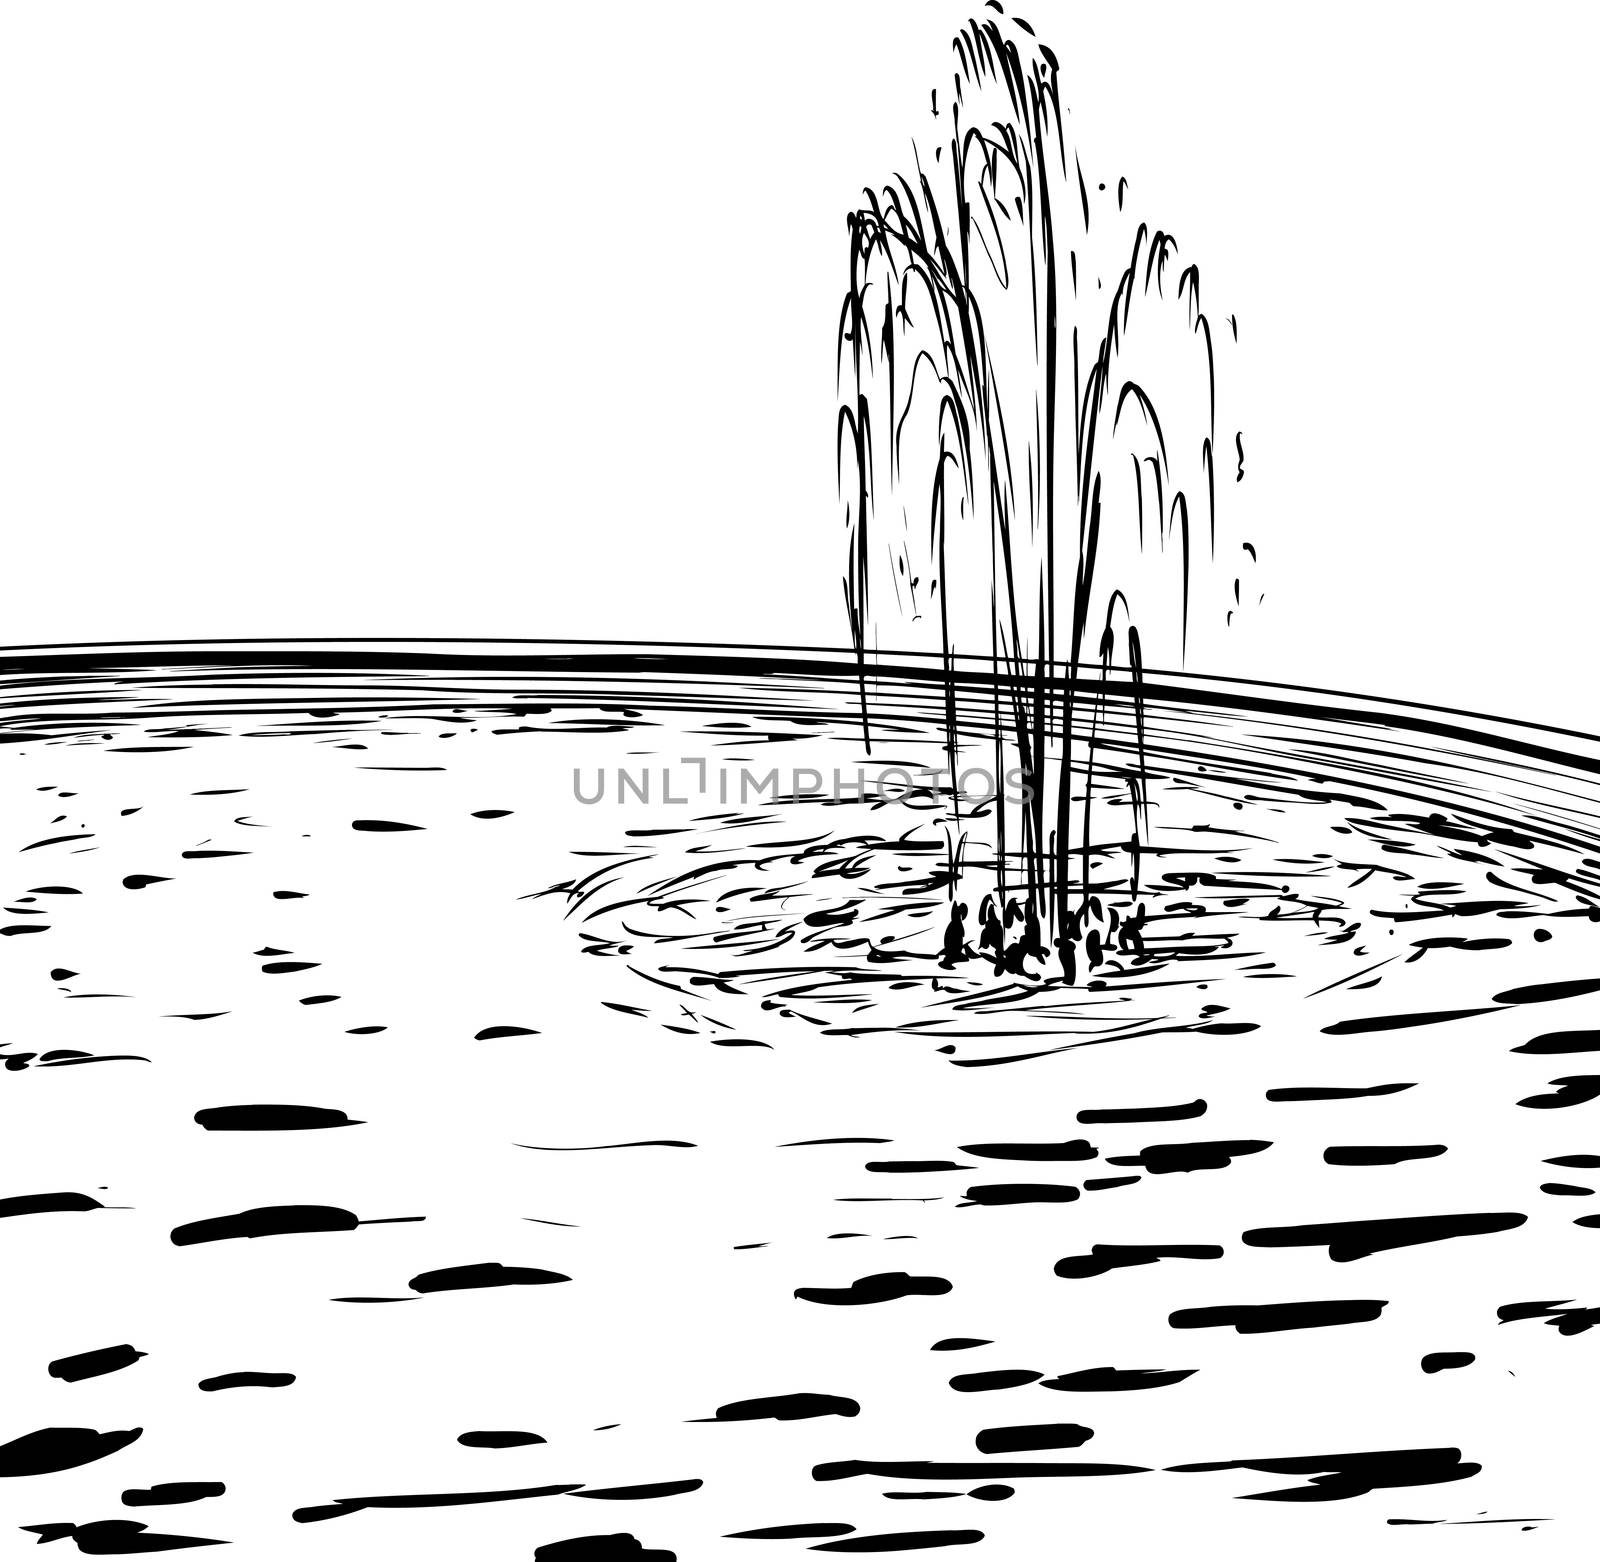 Outlined doodle illustration of water fountain spraying up in round pool